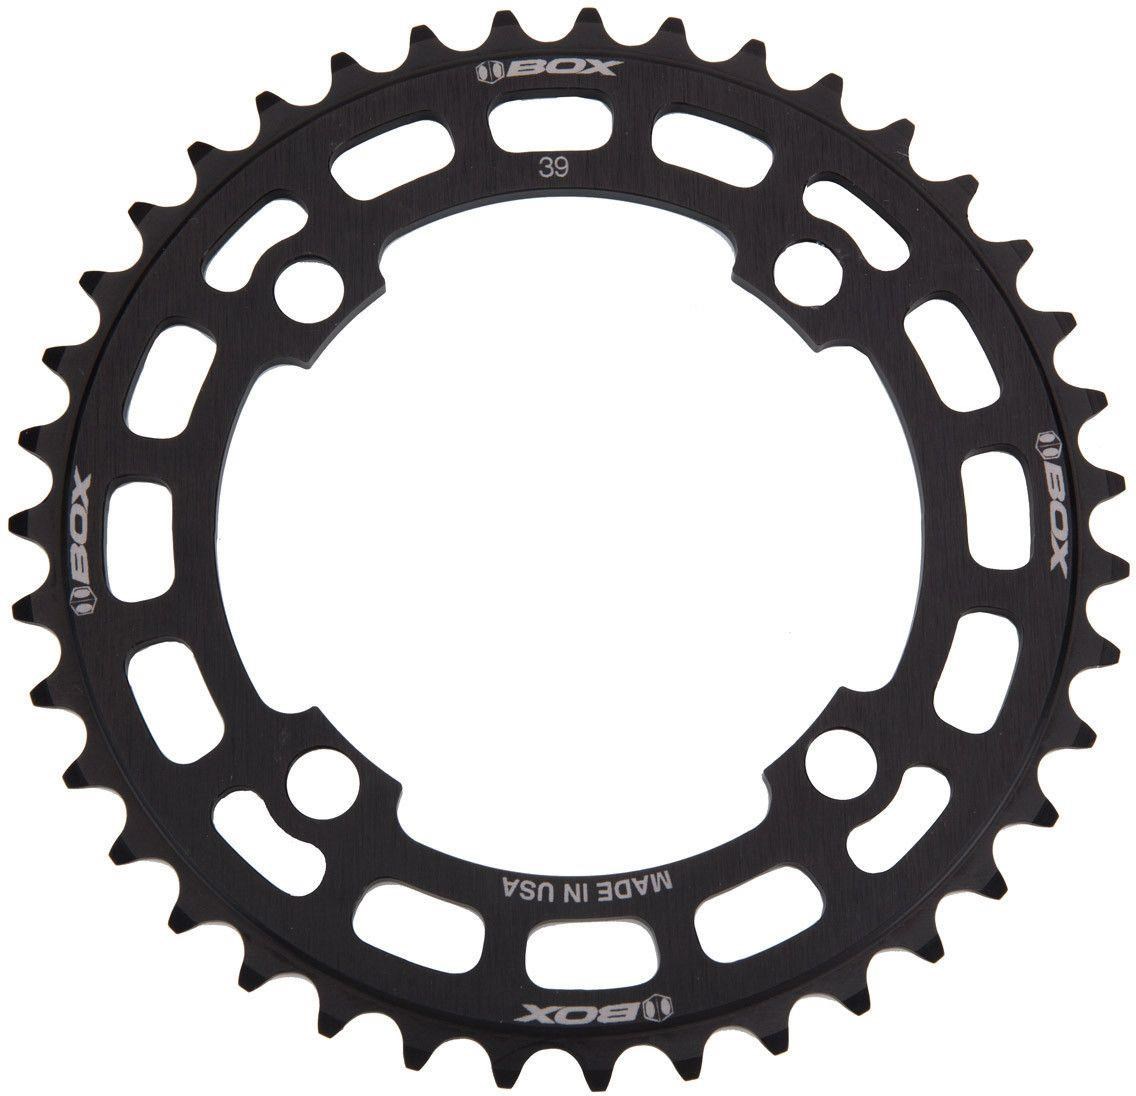 Box Components Cosine Chainring product image